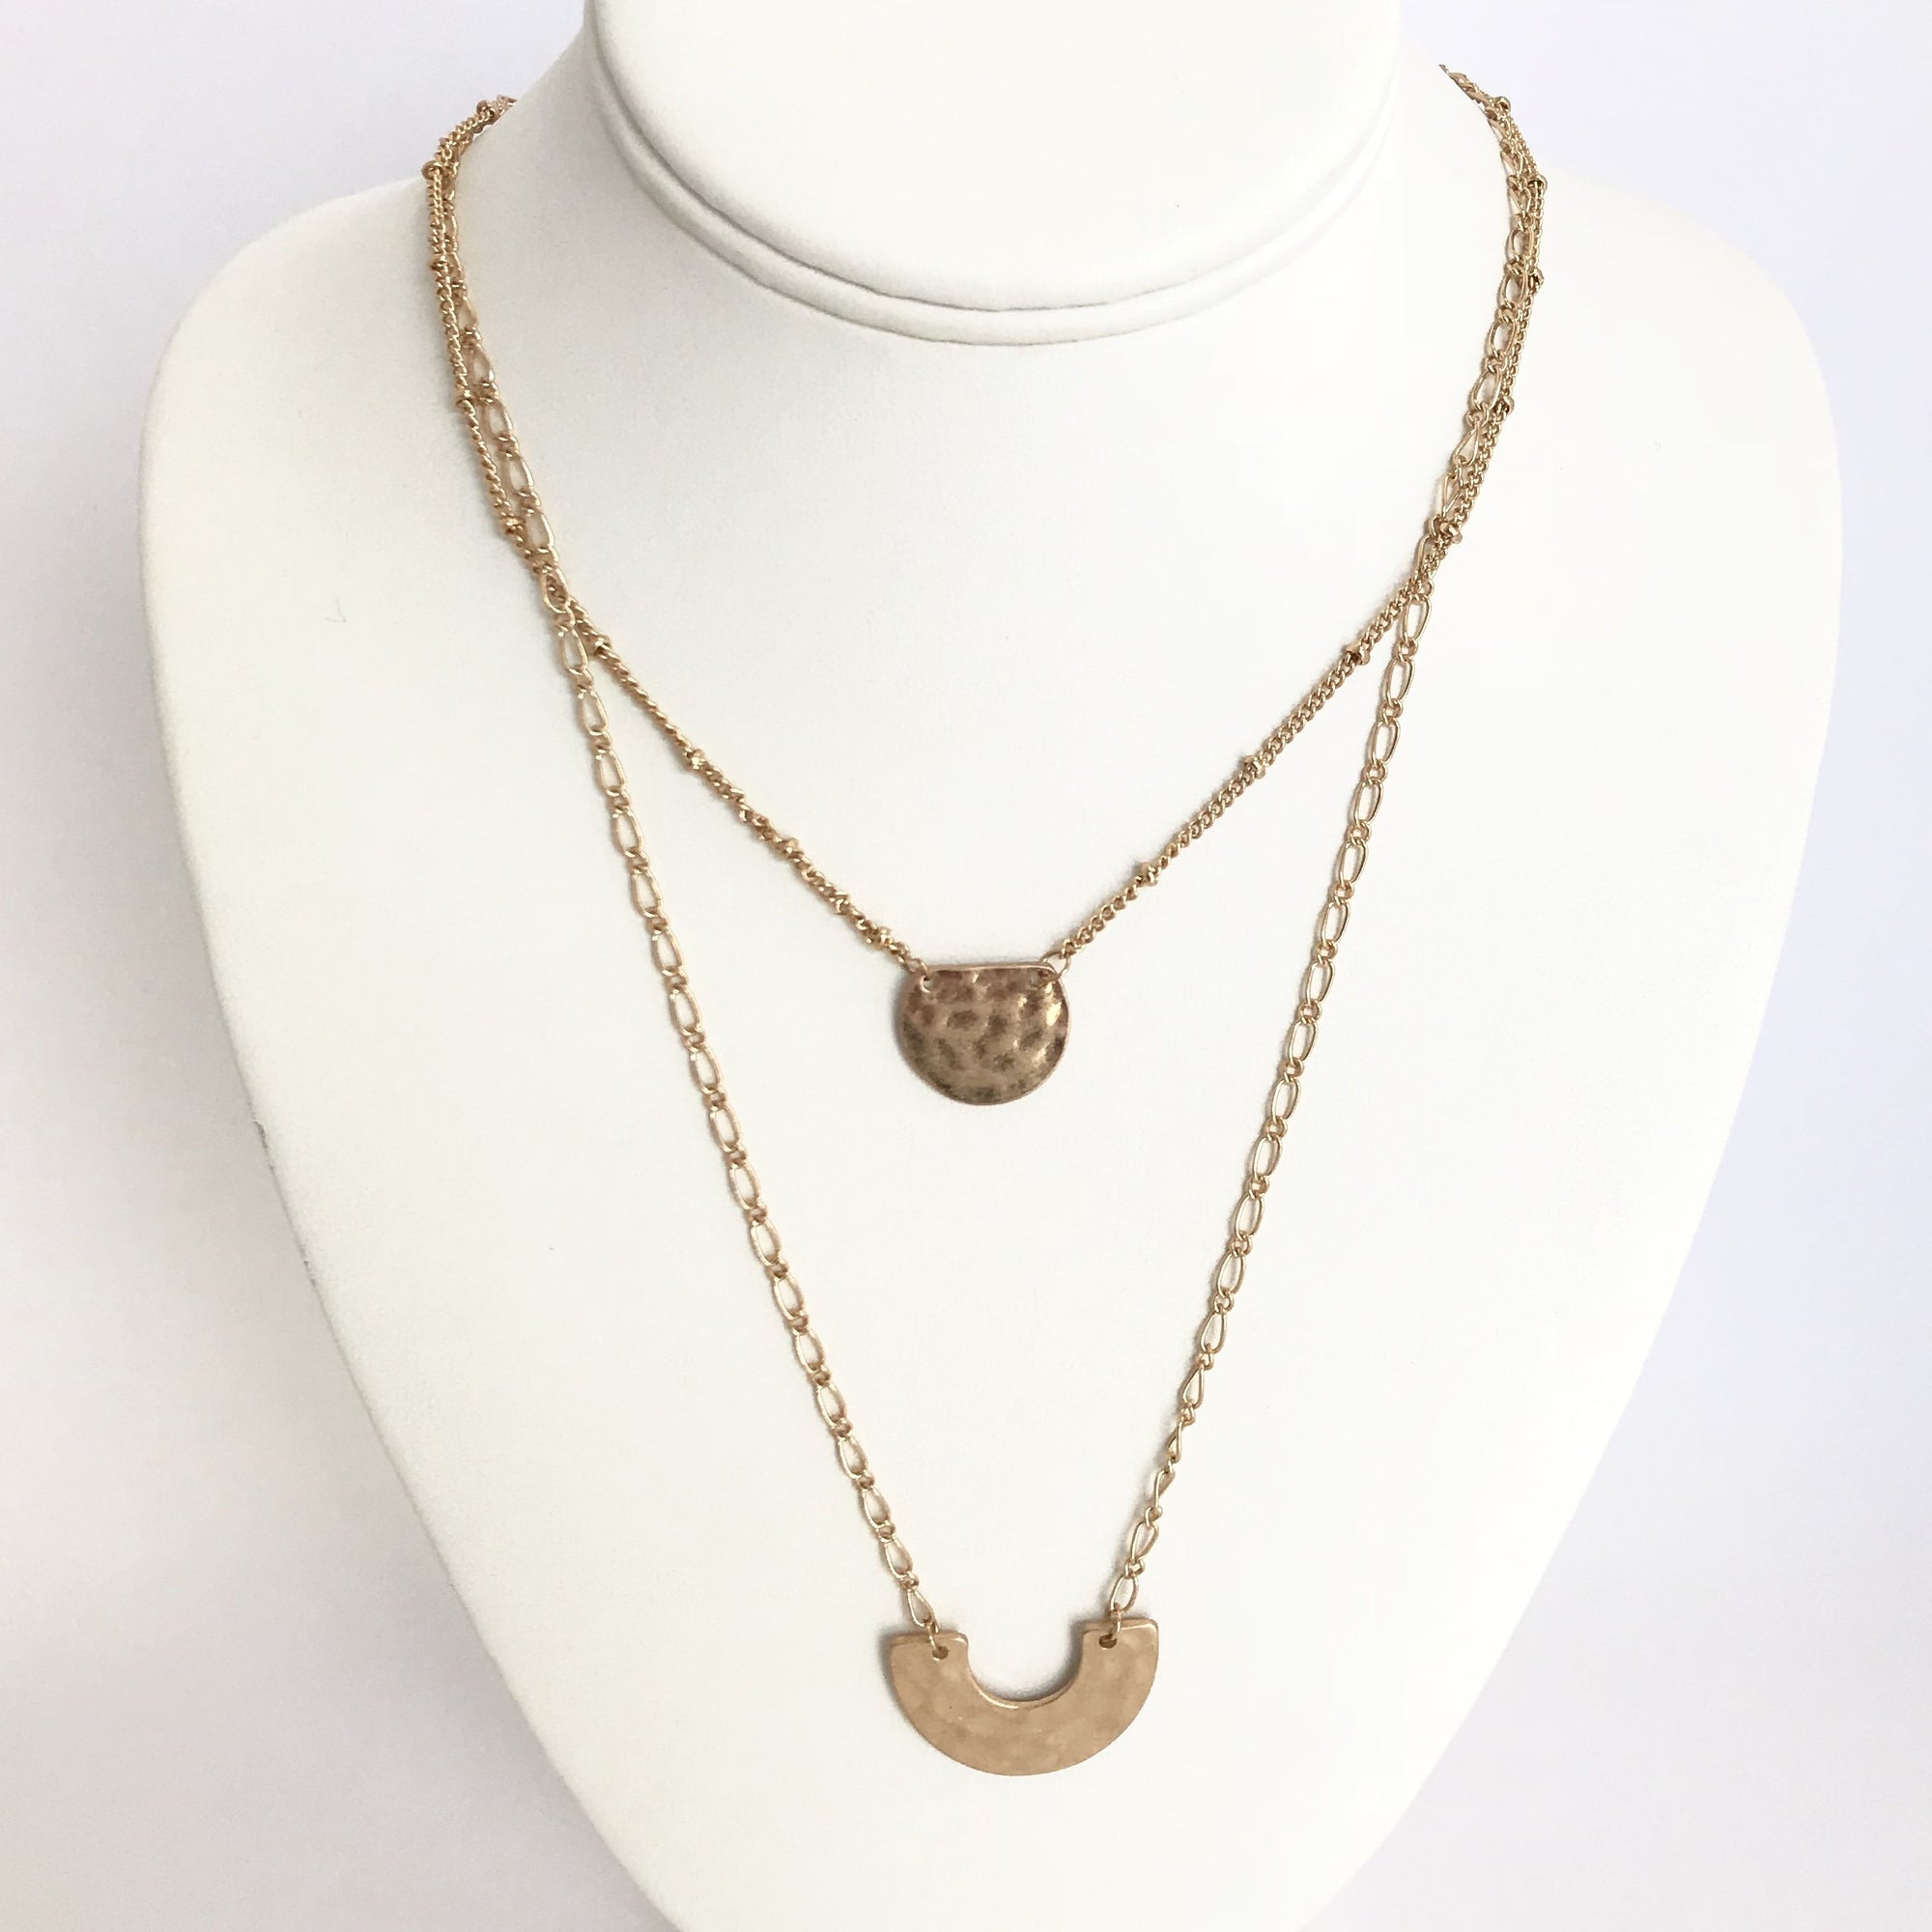 Off The Chain Copper Layered Necklace - Dainty Hooligan